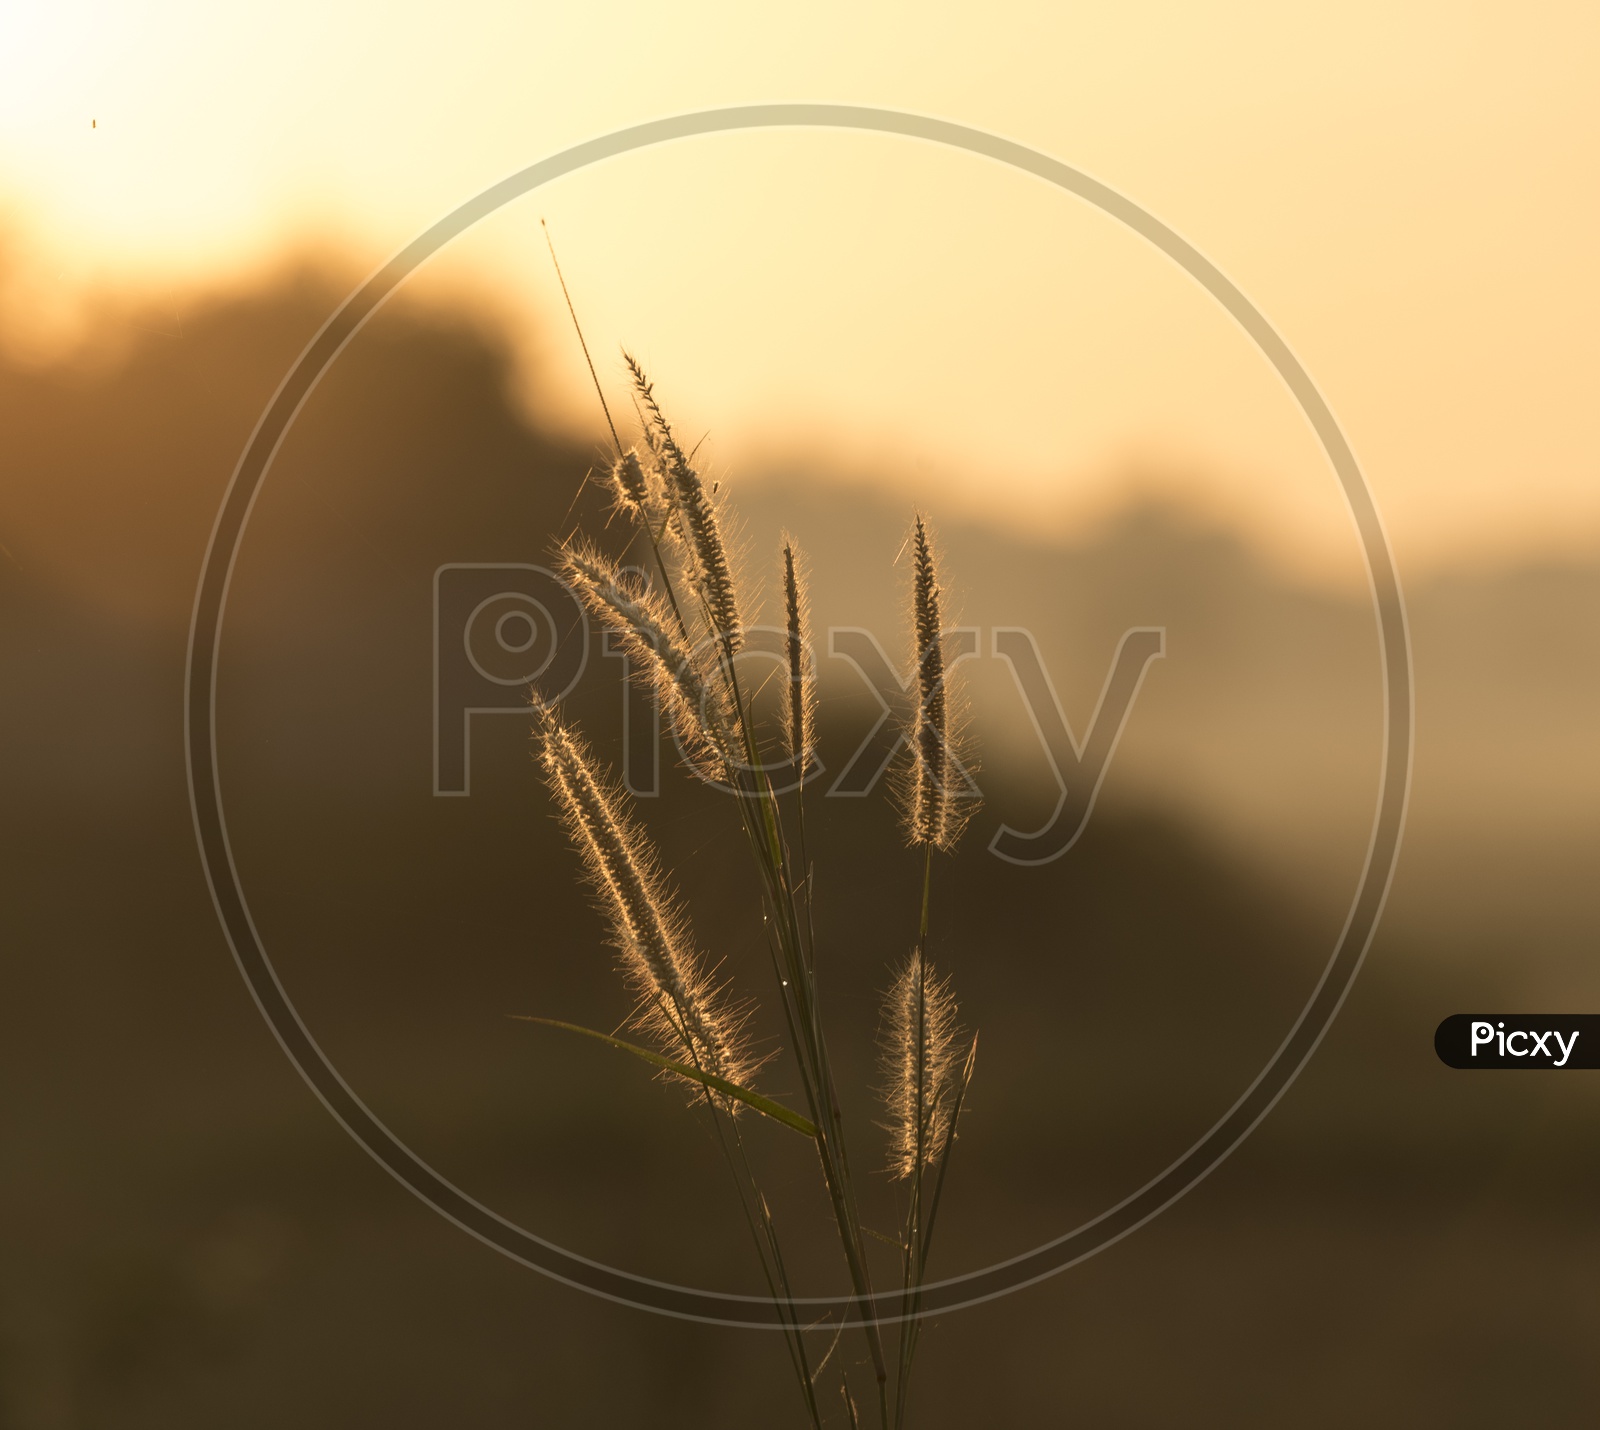 Macro Shot of Grass Flowers with Sunset in Background